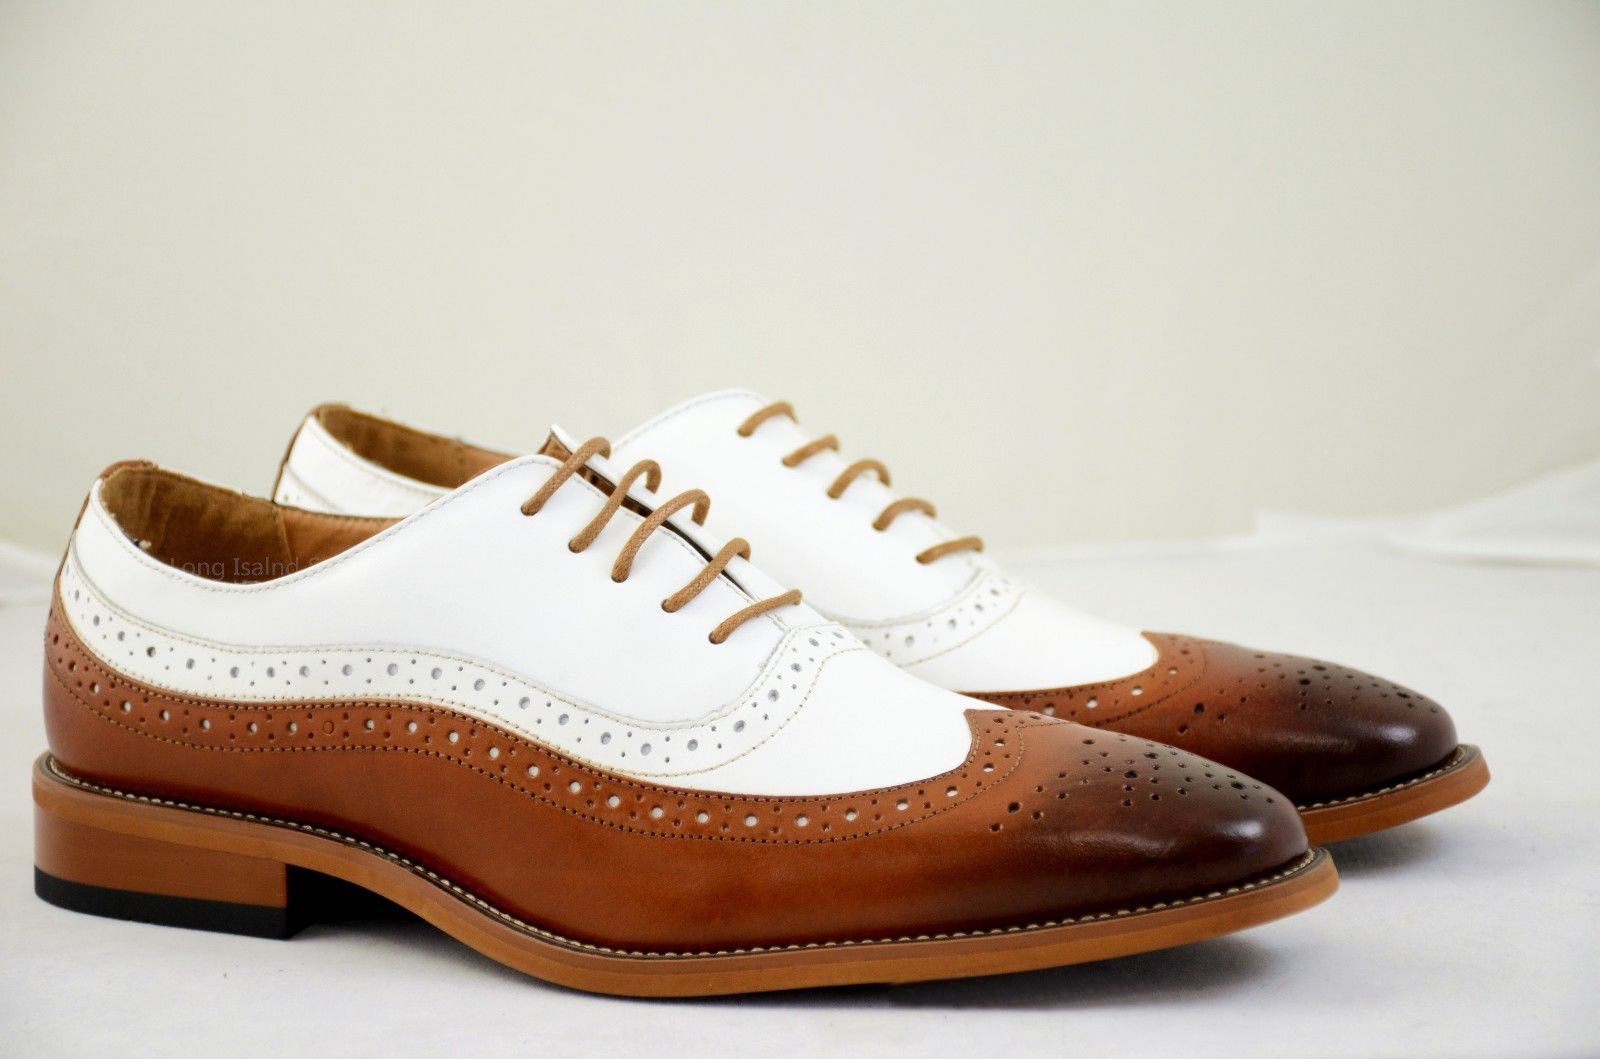 Handmade Dress Shoes Leather, Tan White 2Tone Wing Tip Oxford Shoes ...